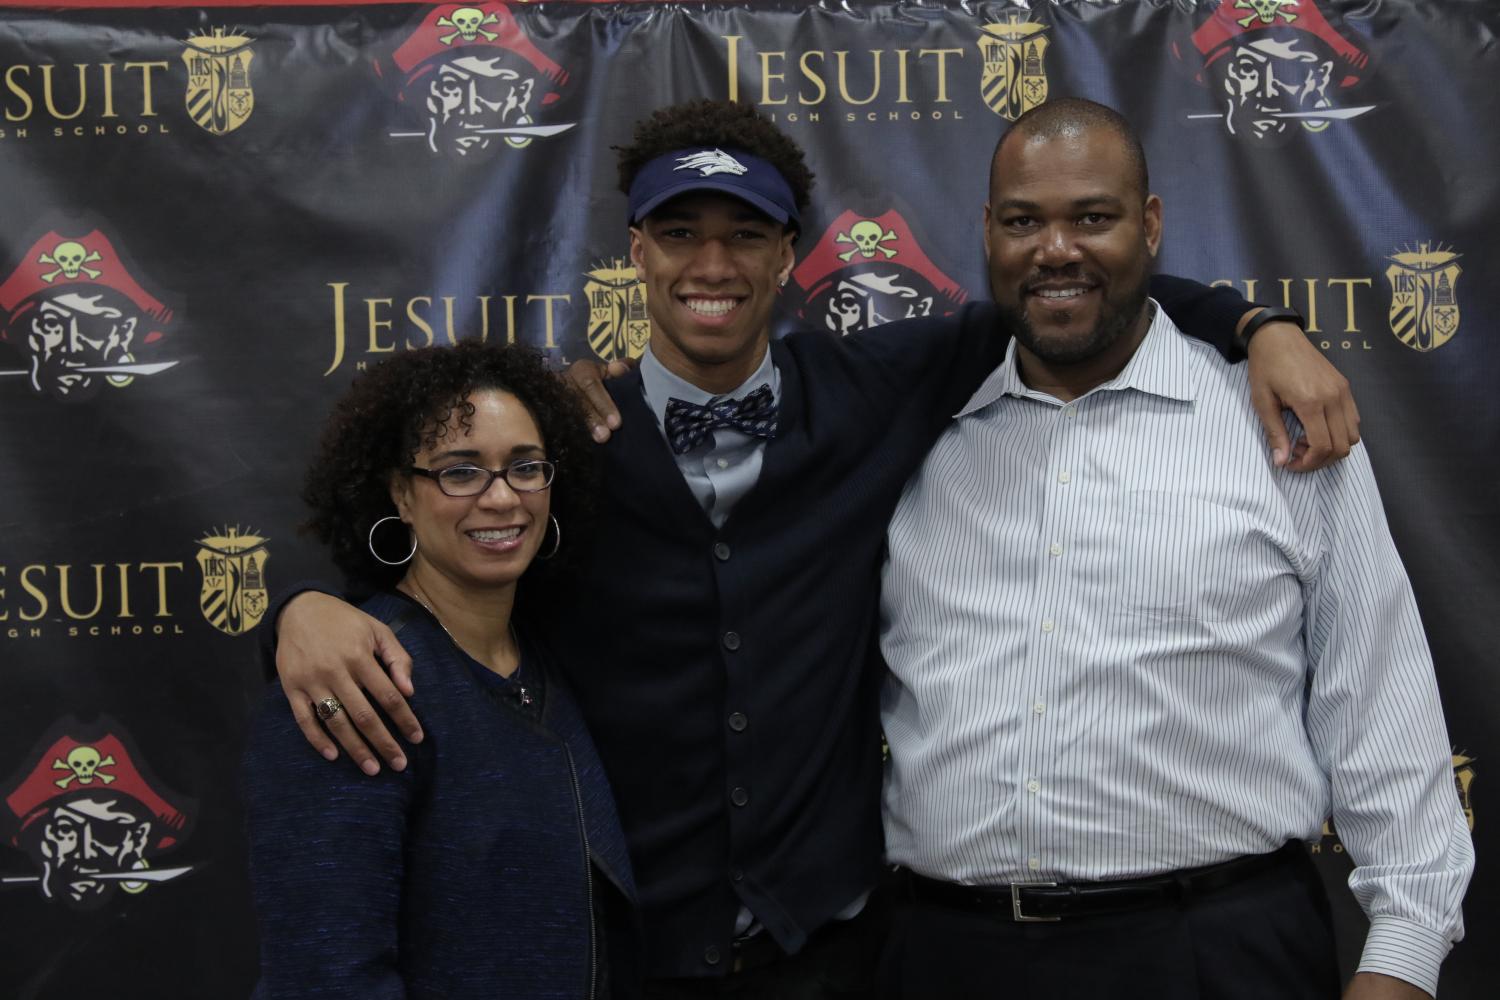 Kori Collons poses with family on National Signing Day in 2015. | Jesuit Communications